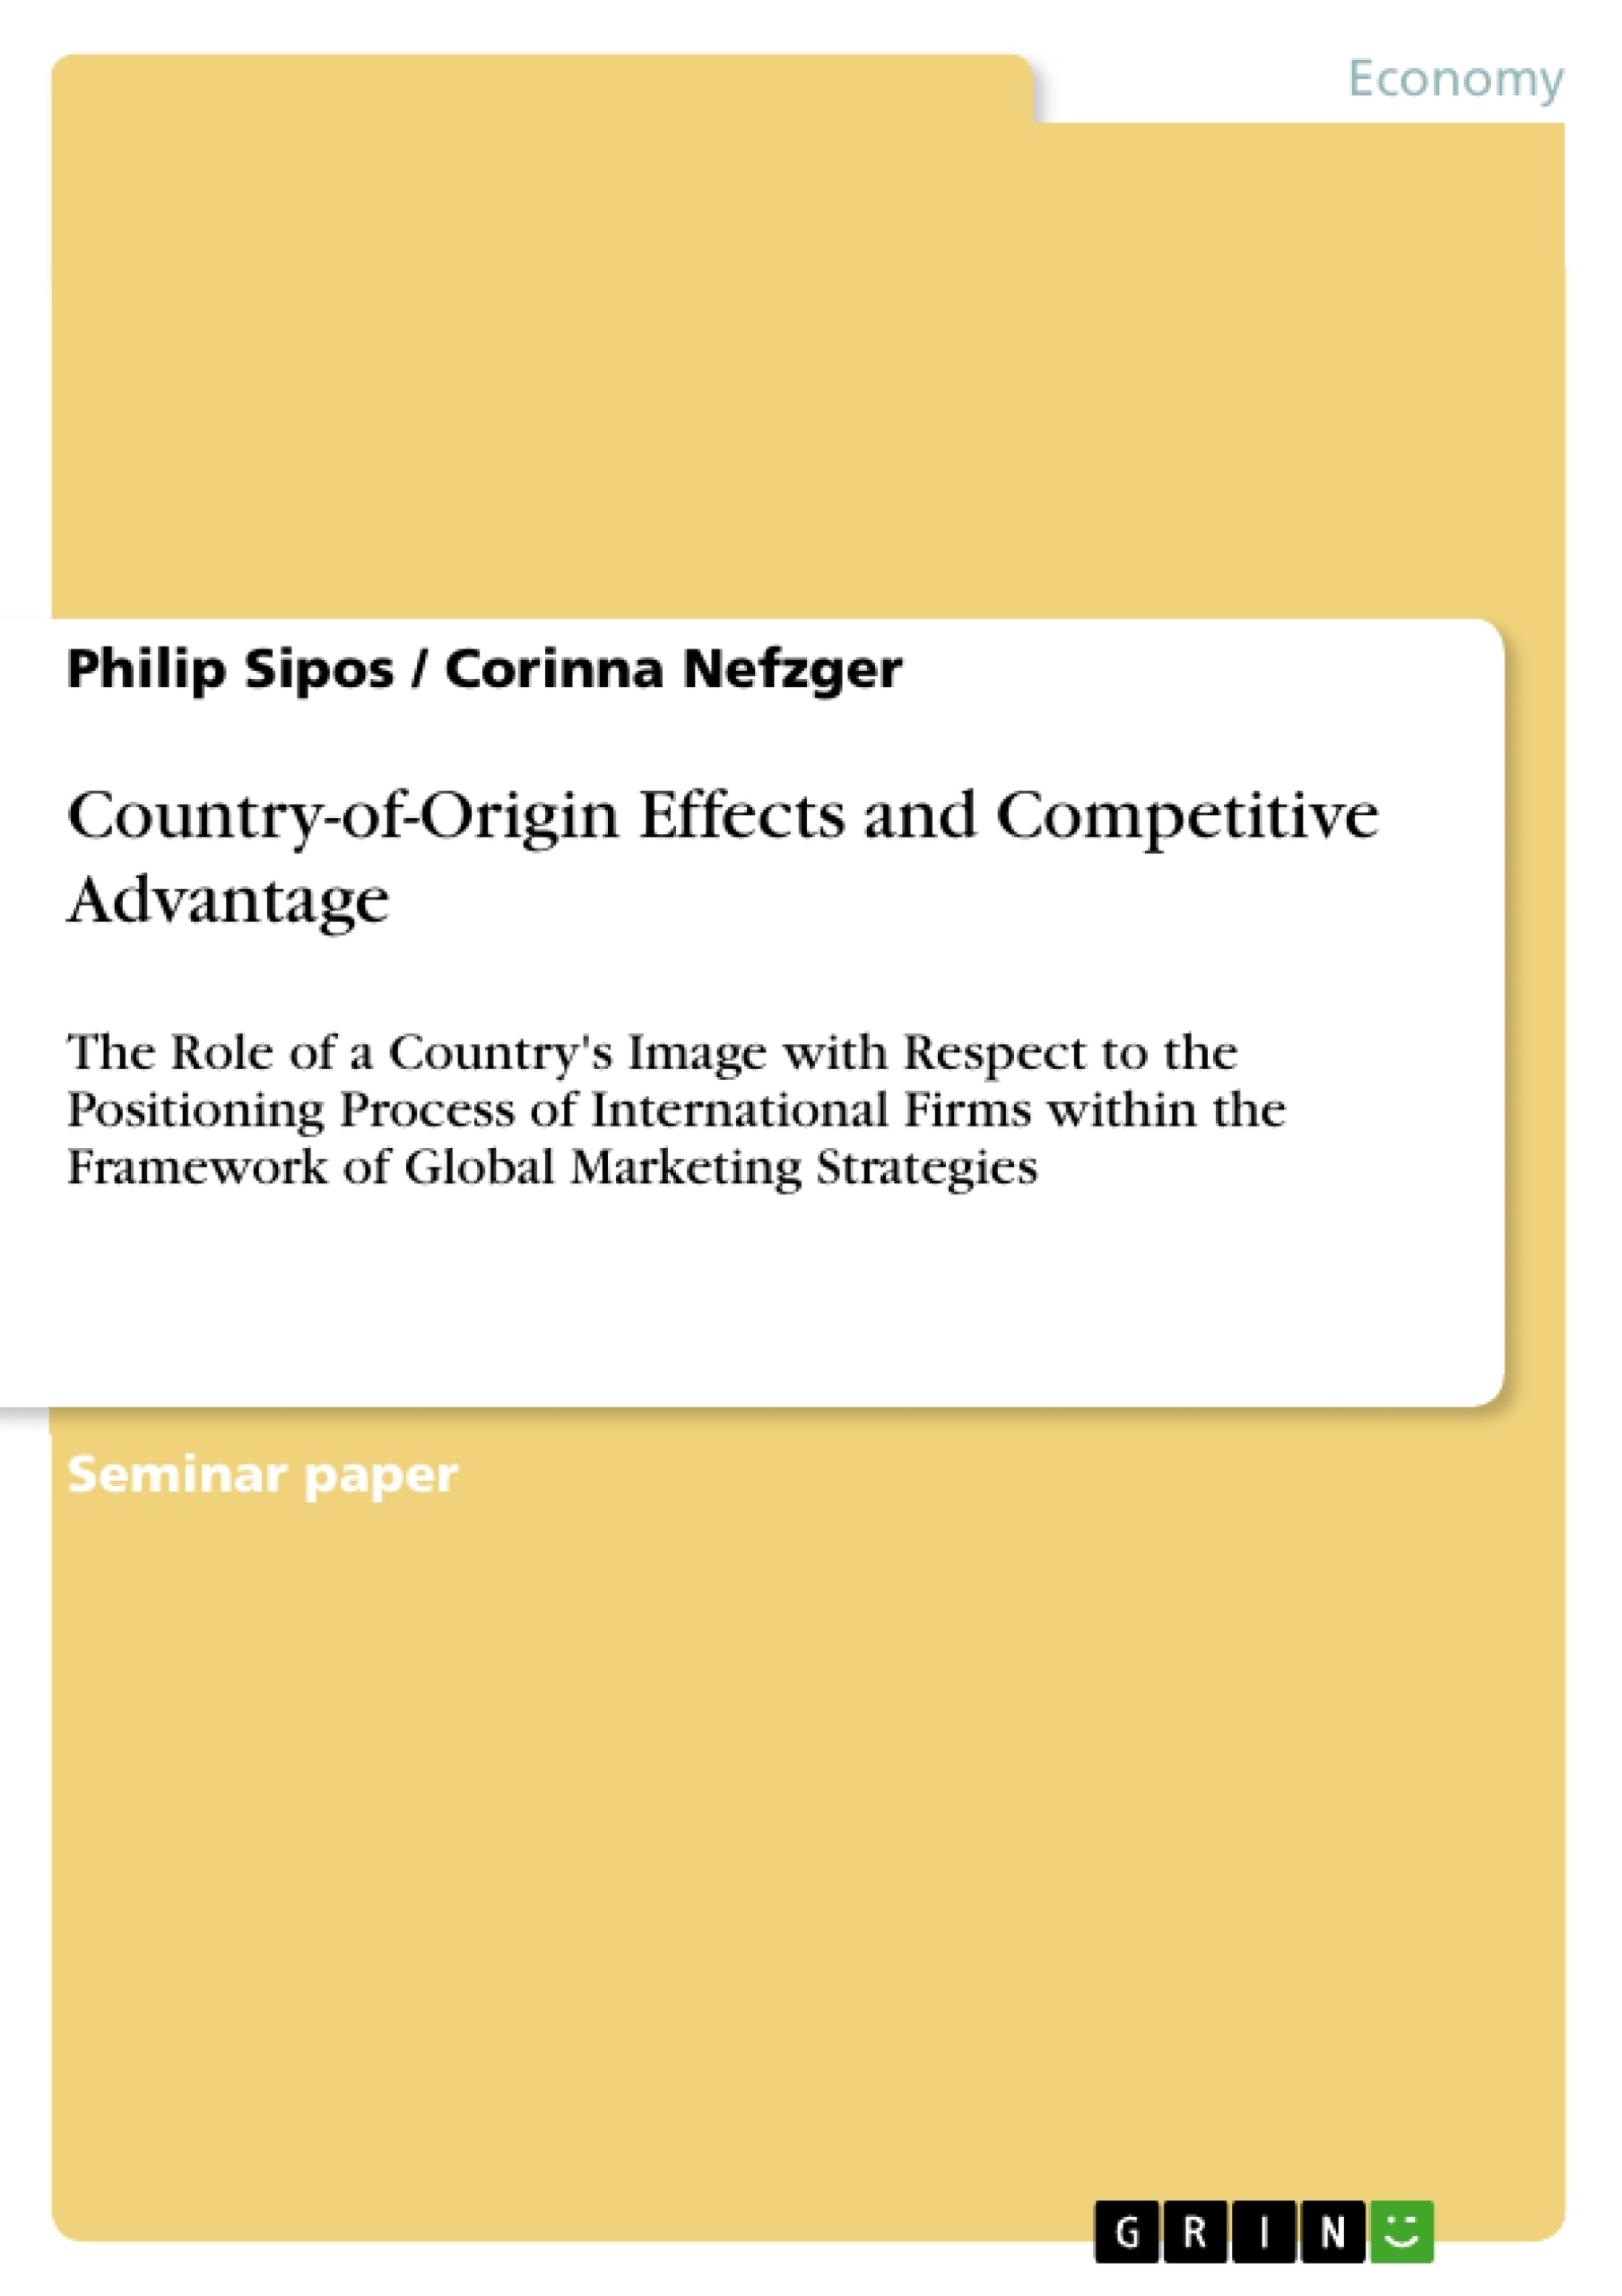 Title: Country-of-Origin Effects and Competitive Advantage